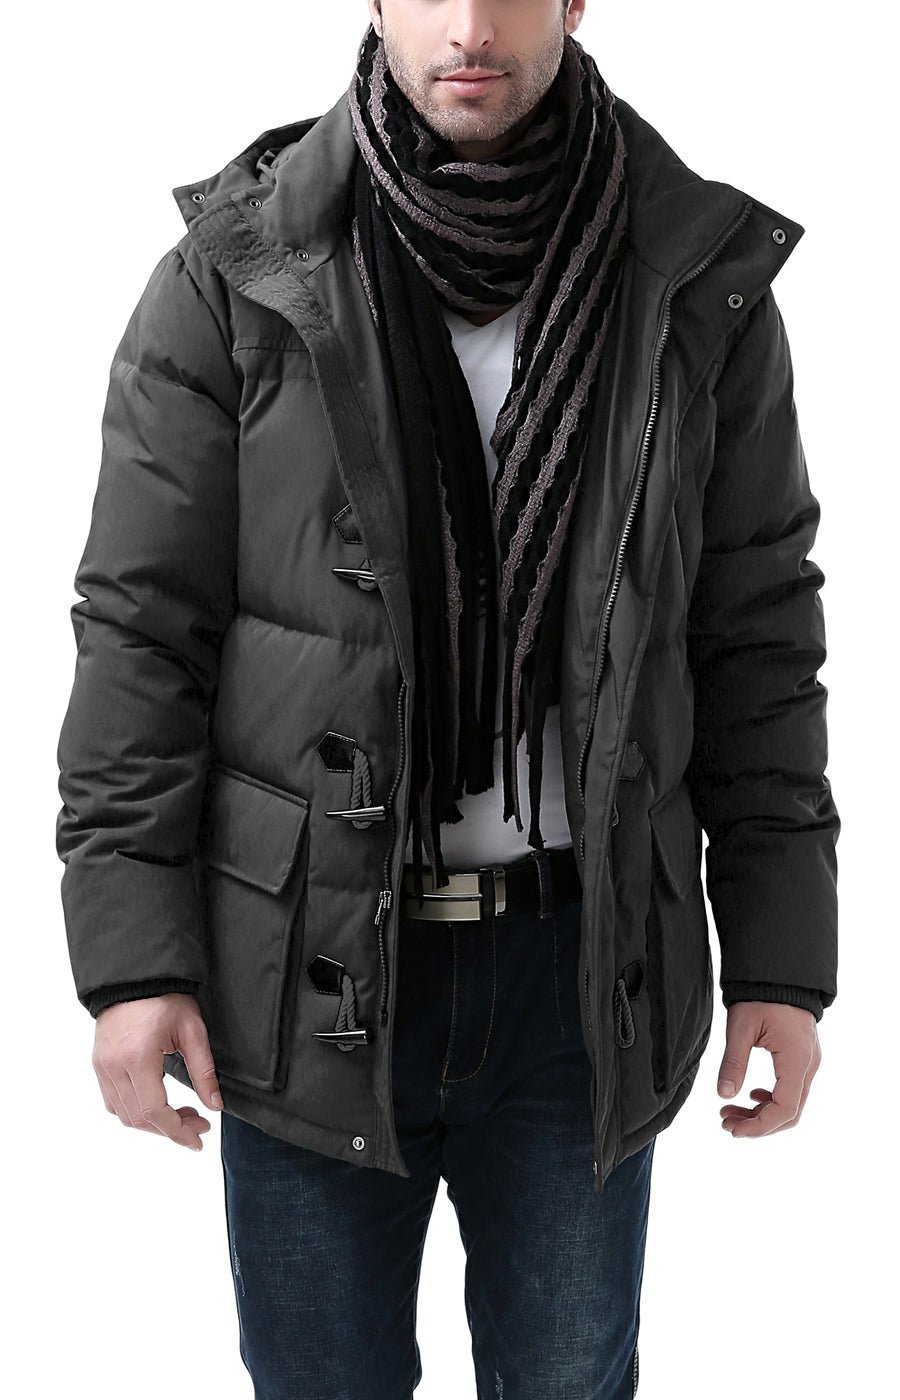 BGSD Men's "Connor" Hooded Waterproof Toggle Down Parka Coat